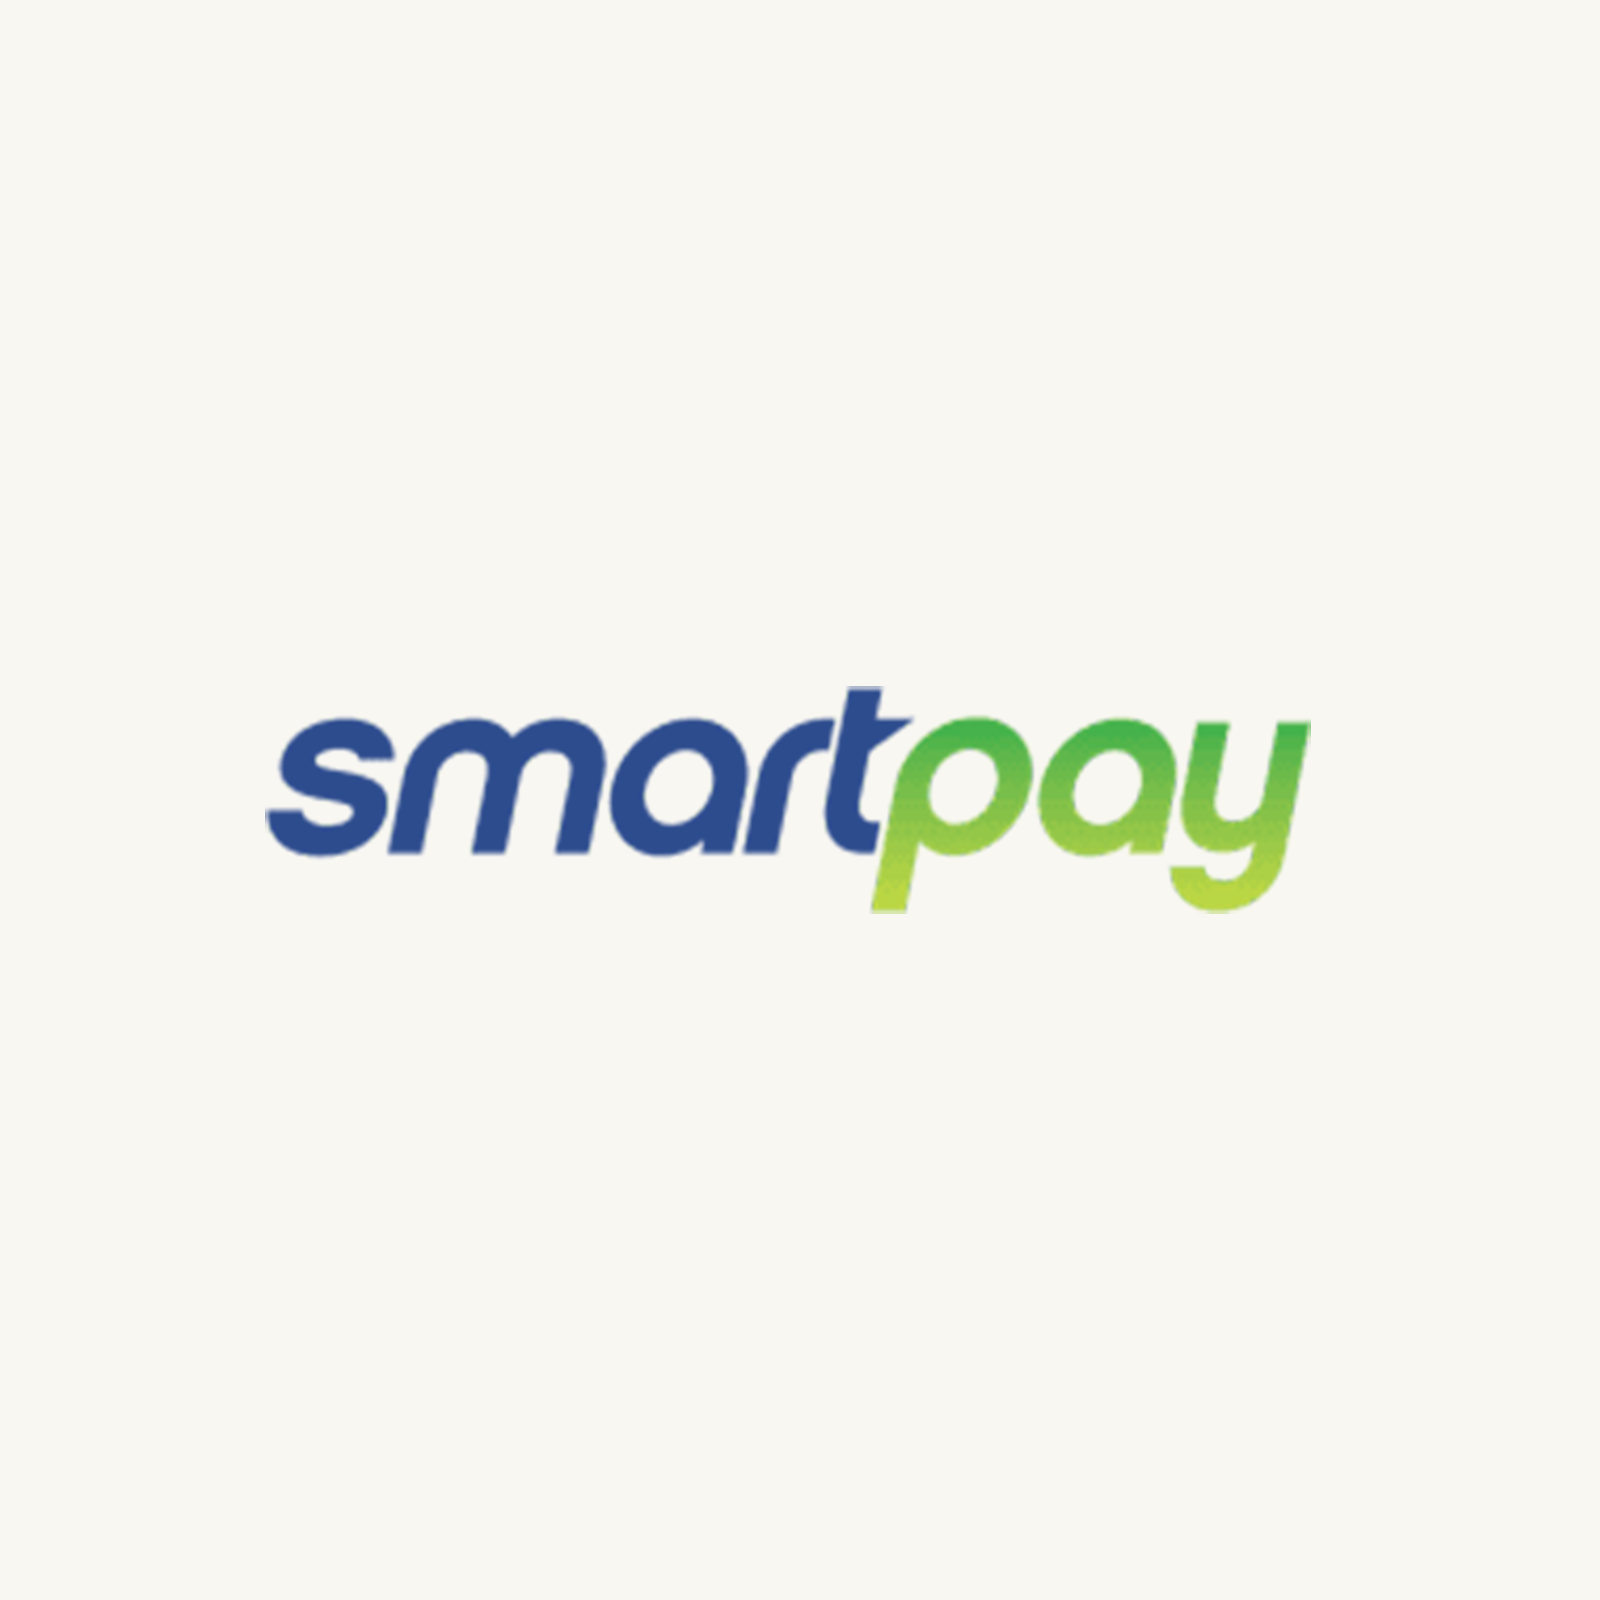 Bayar Ganbold recently appointed as Merchant Settlements Manager at Smartpay.